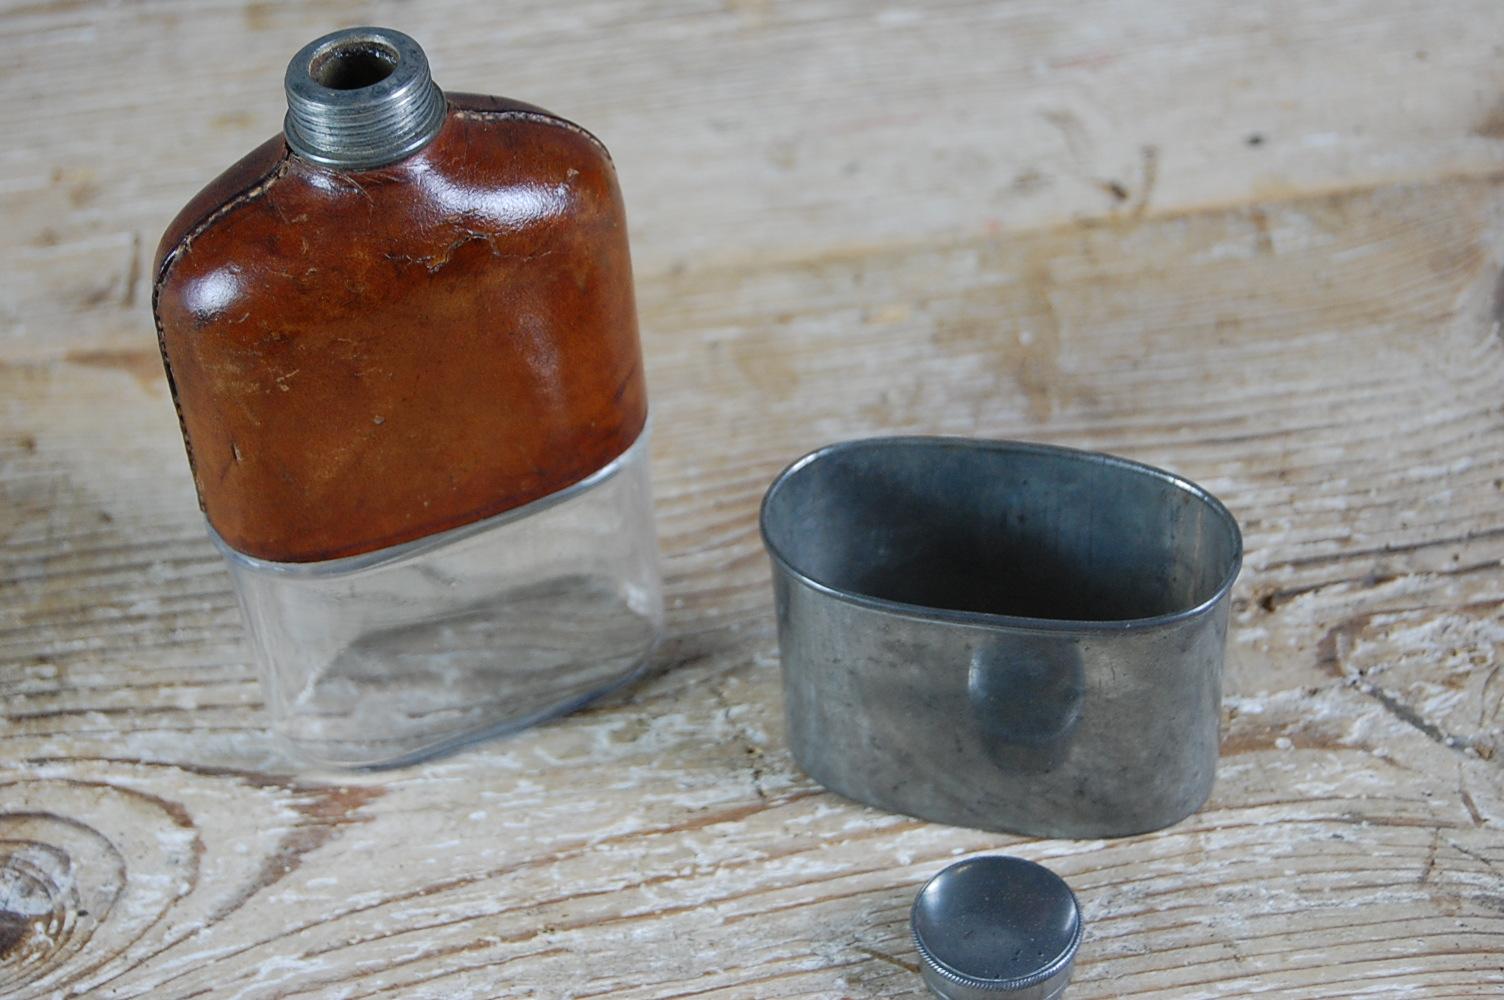 Charming Edwardian Gentlemans hip flask. Glass, pewter and leather. The leather has taken a warm patination. Generally used to enable the sportsman to take a nip or dram of their favourite tipple into the field, fits snugly into a pocket. Screw lid,